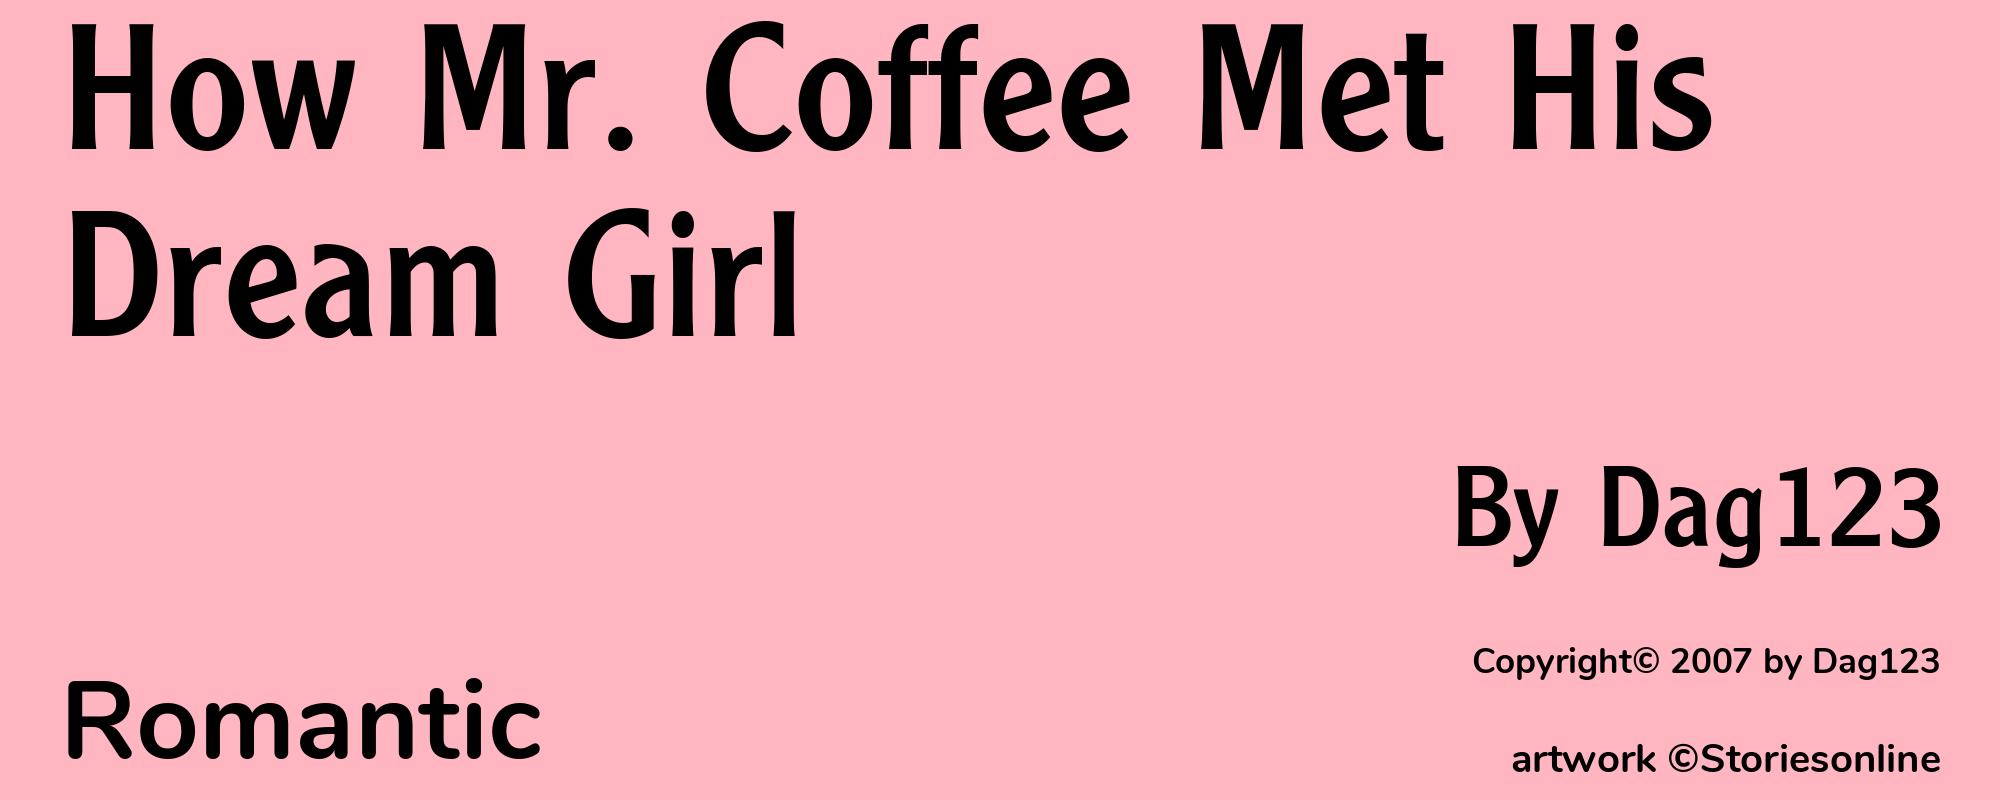 How Mr. Coffee Met His Dream Girl - Cover